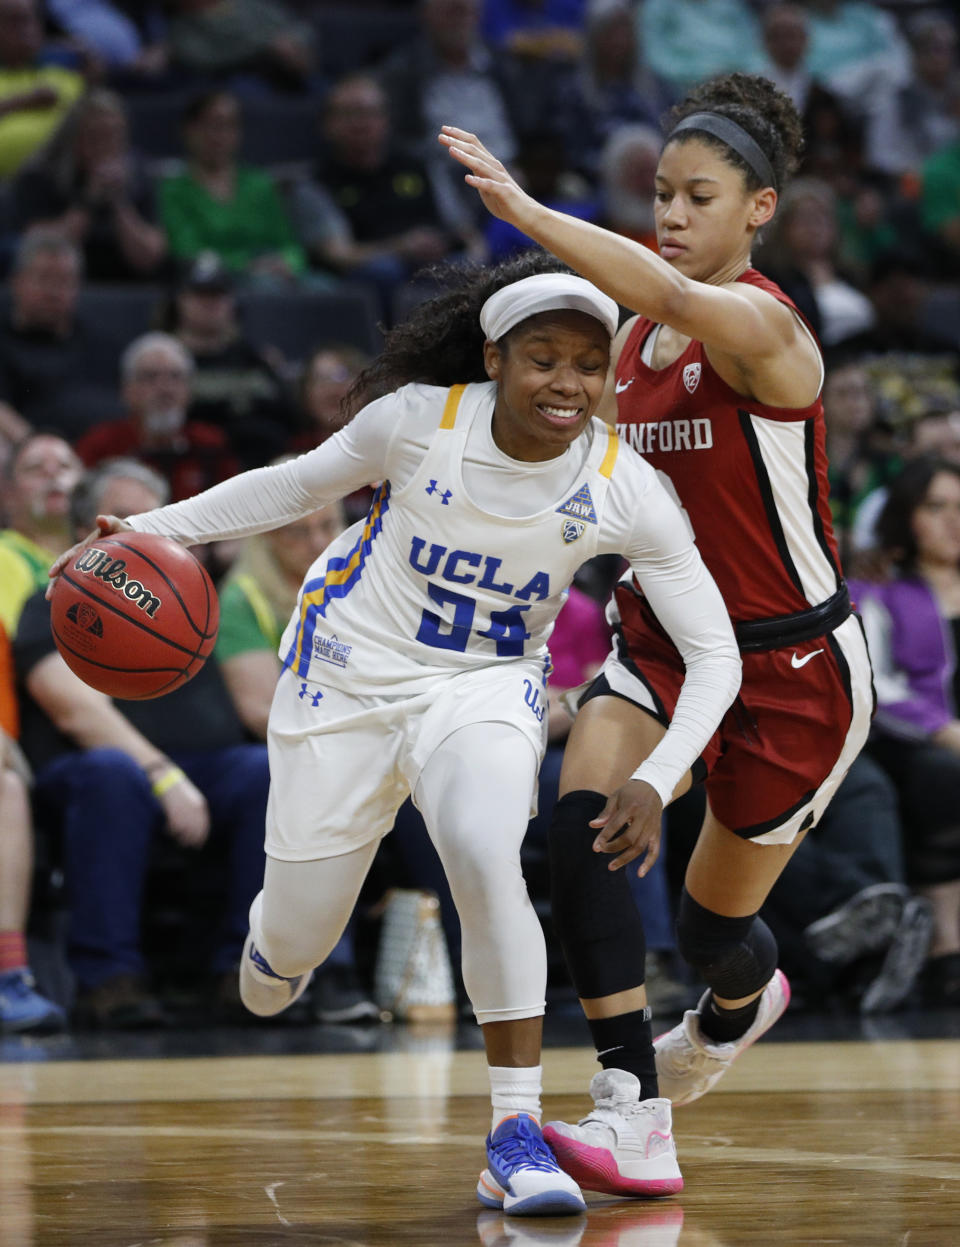 UCLA's Japreece Dean (24) drives around Stanford's Anna Wilson (3) during the second half of an NCAA college basketball game in the semifinal round of the Pac-12 women's tournament Saturday, March 7, 2020, in Las Vegas. (AP Photo/John Locher)